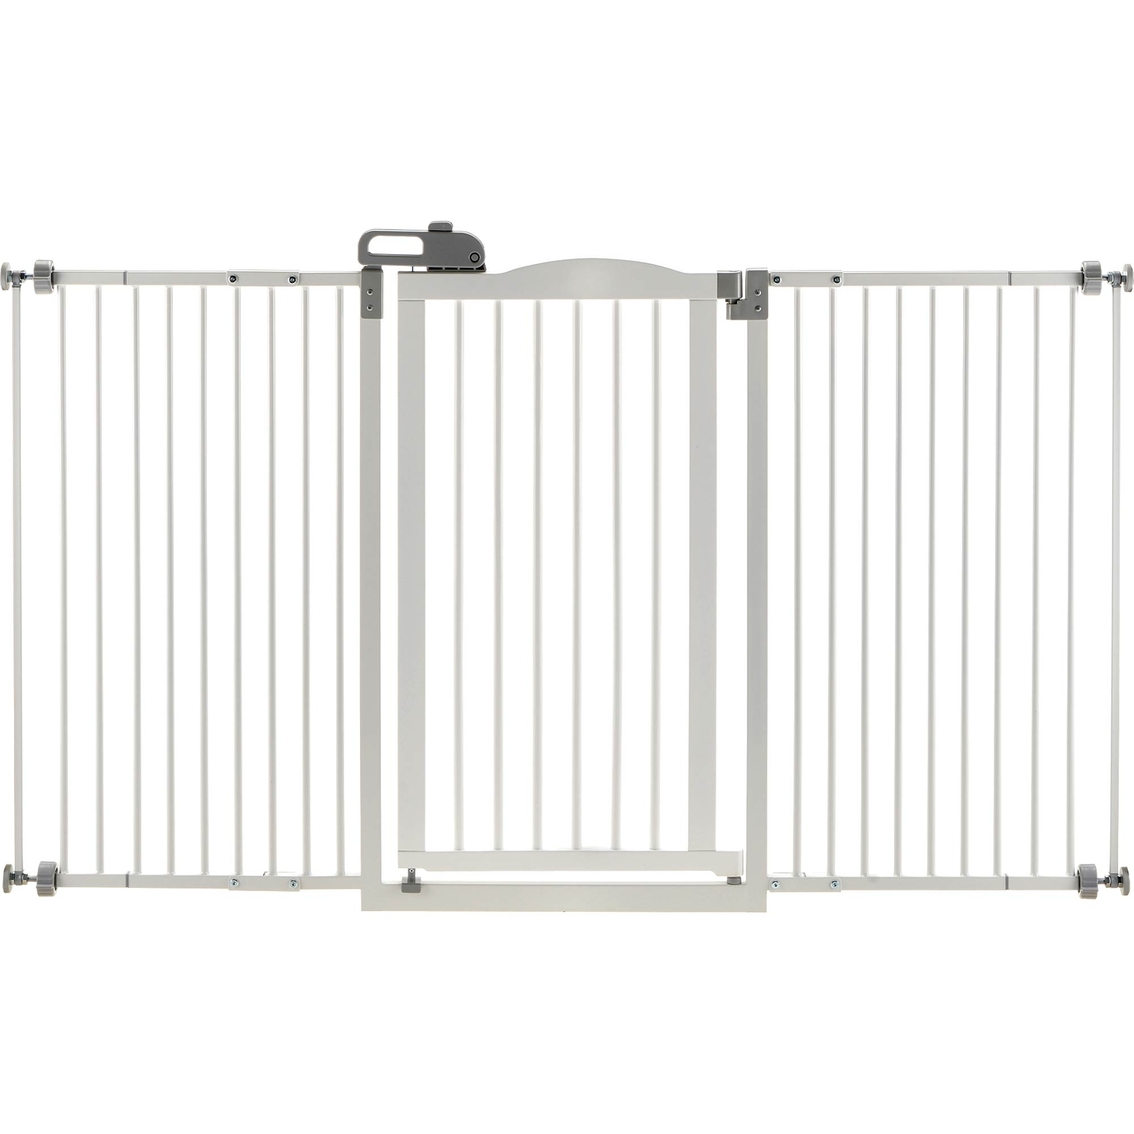 Richell White Tall One Touch Gate II - Image 1 of 2